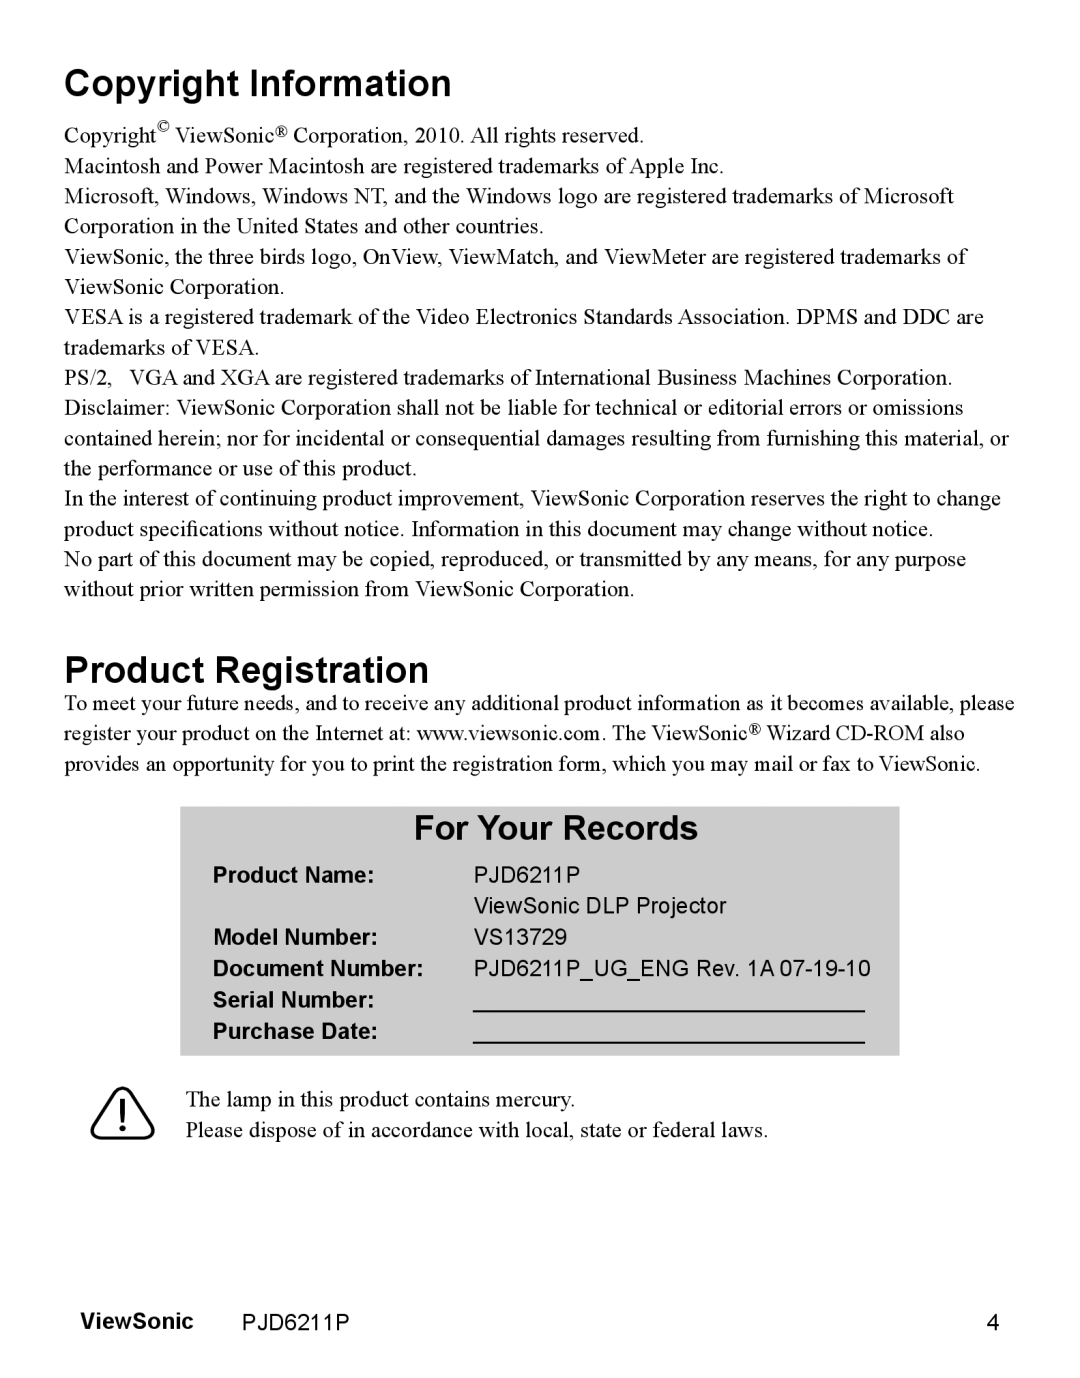 ViewSonic PJD6211P Copyright Information, Product Registration, For Your Records, Product Name, Model Number, ViewSonic 